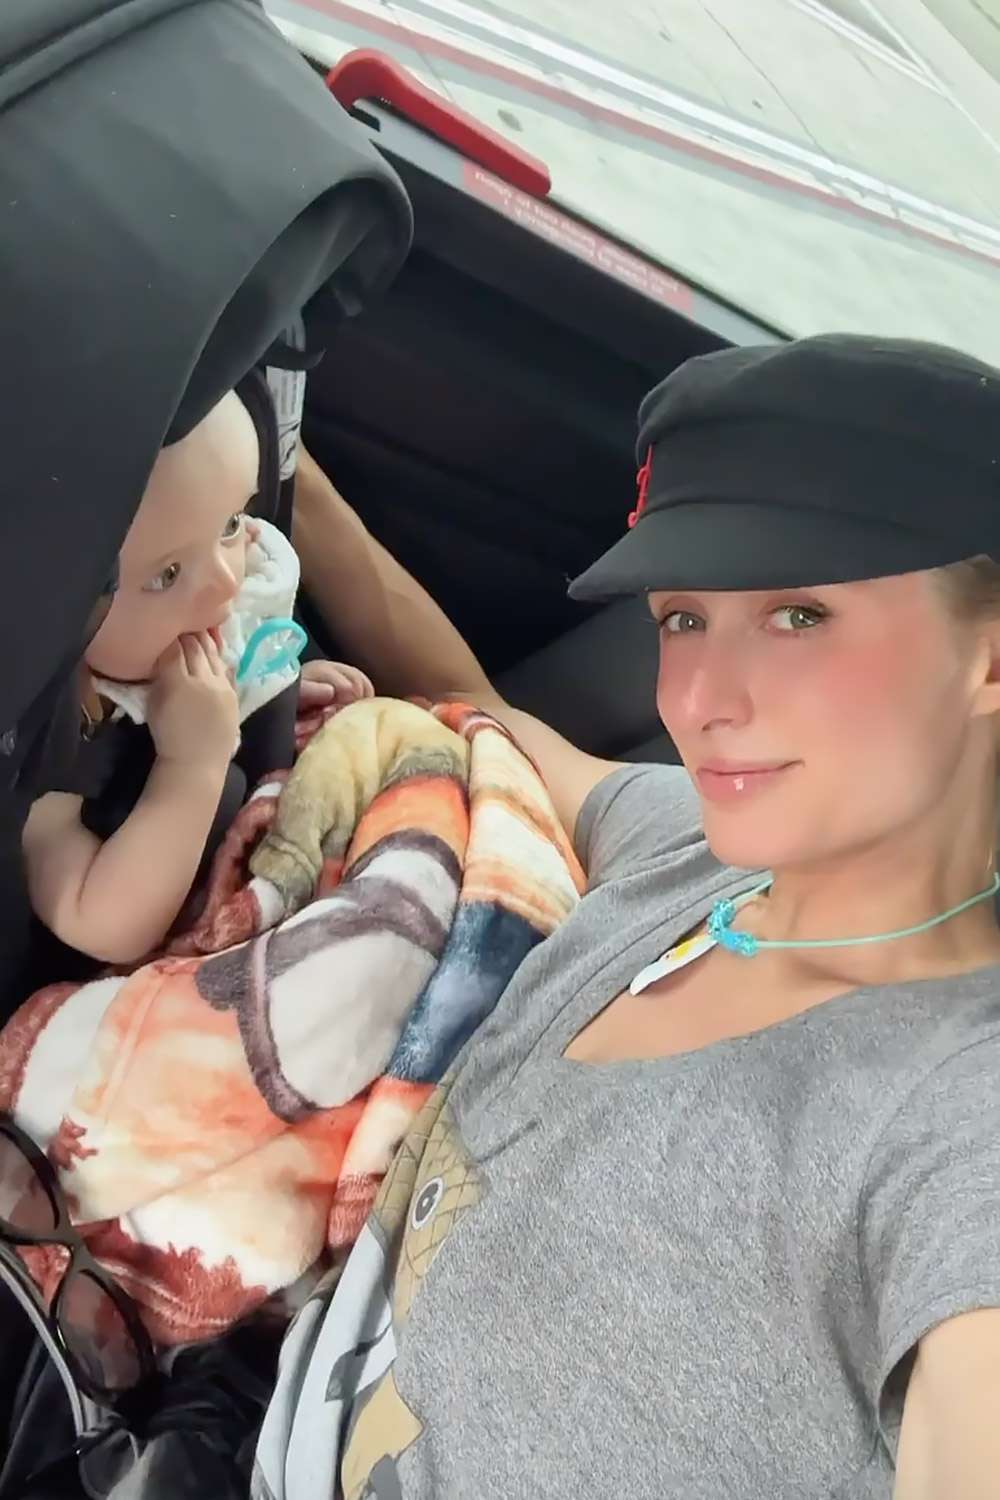 Paris Hilton Takes Trip With Son Phoenix, Reveals She Travels With a Pillow With Her Own Face On It